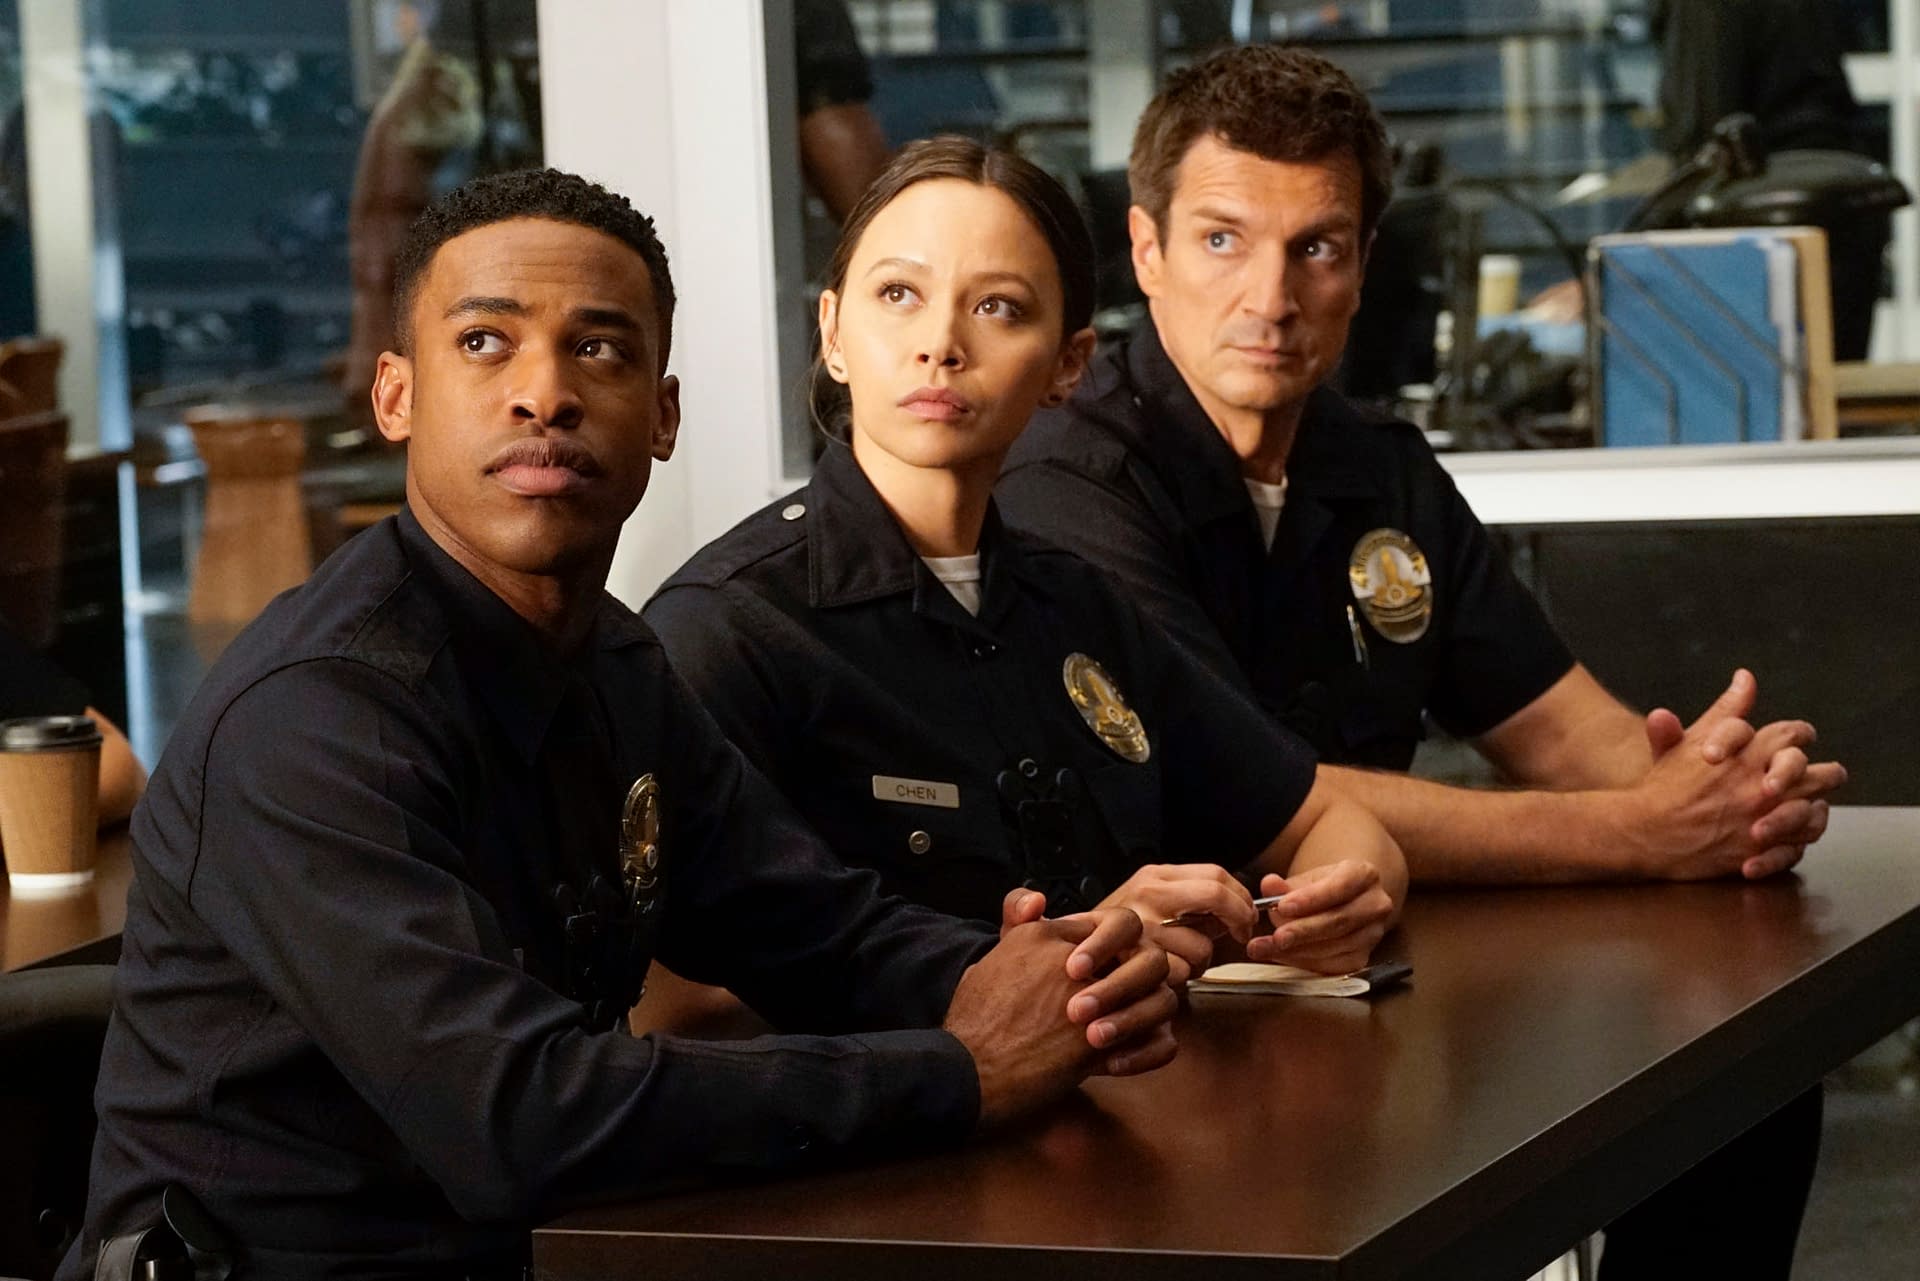 THE ROOKIE - "Warriors and Guardians" - ABC/Kelsey McNeal